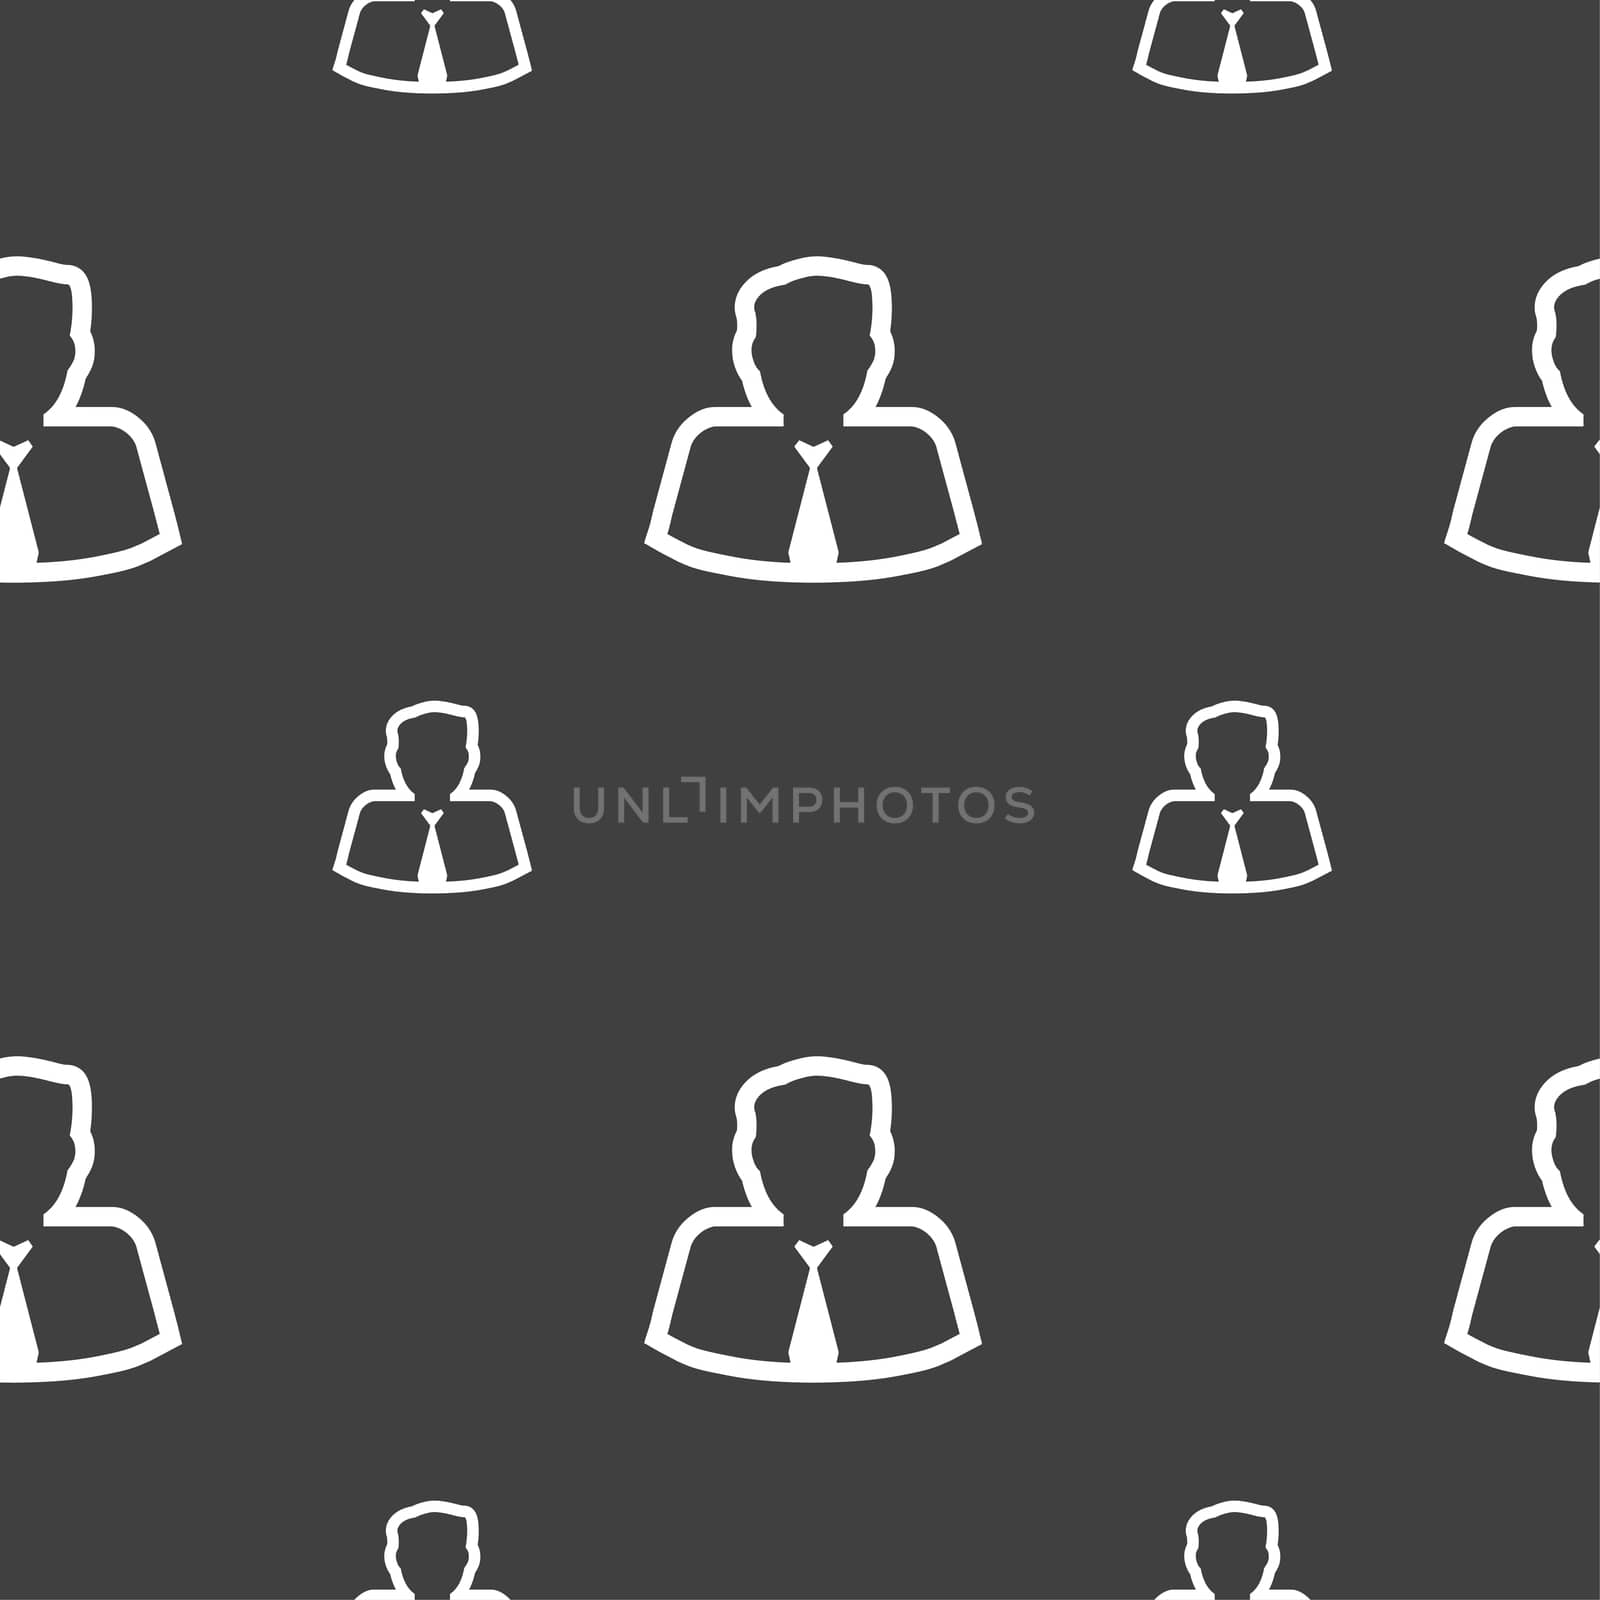 Avatar icon sign. Seamless pattern on a gray background. illustration